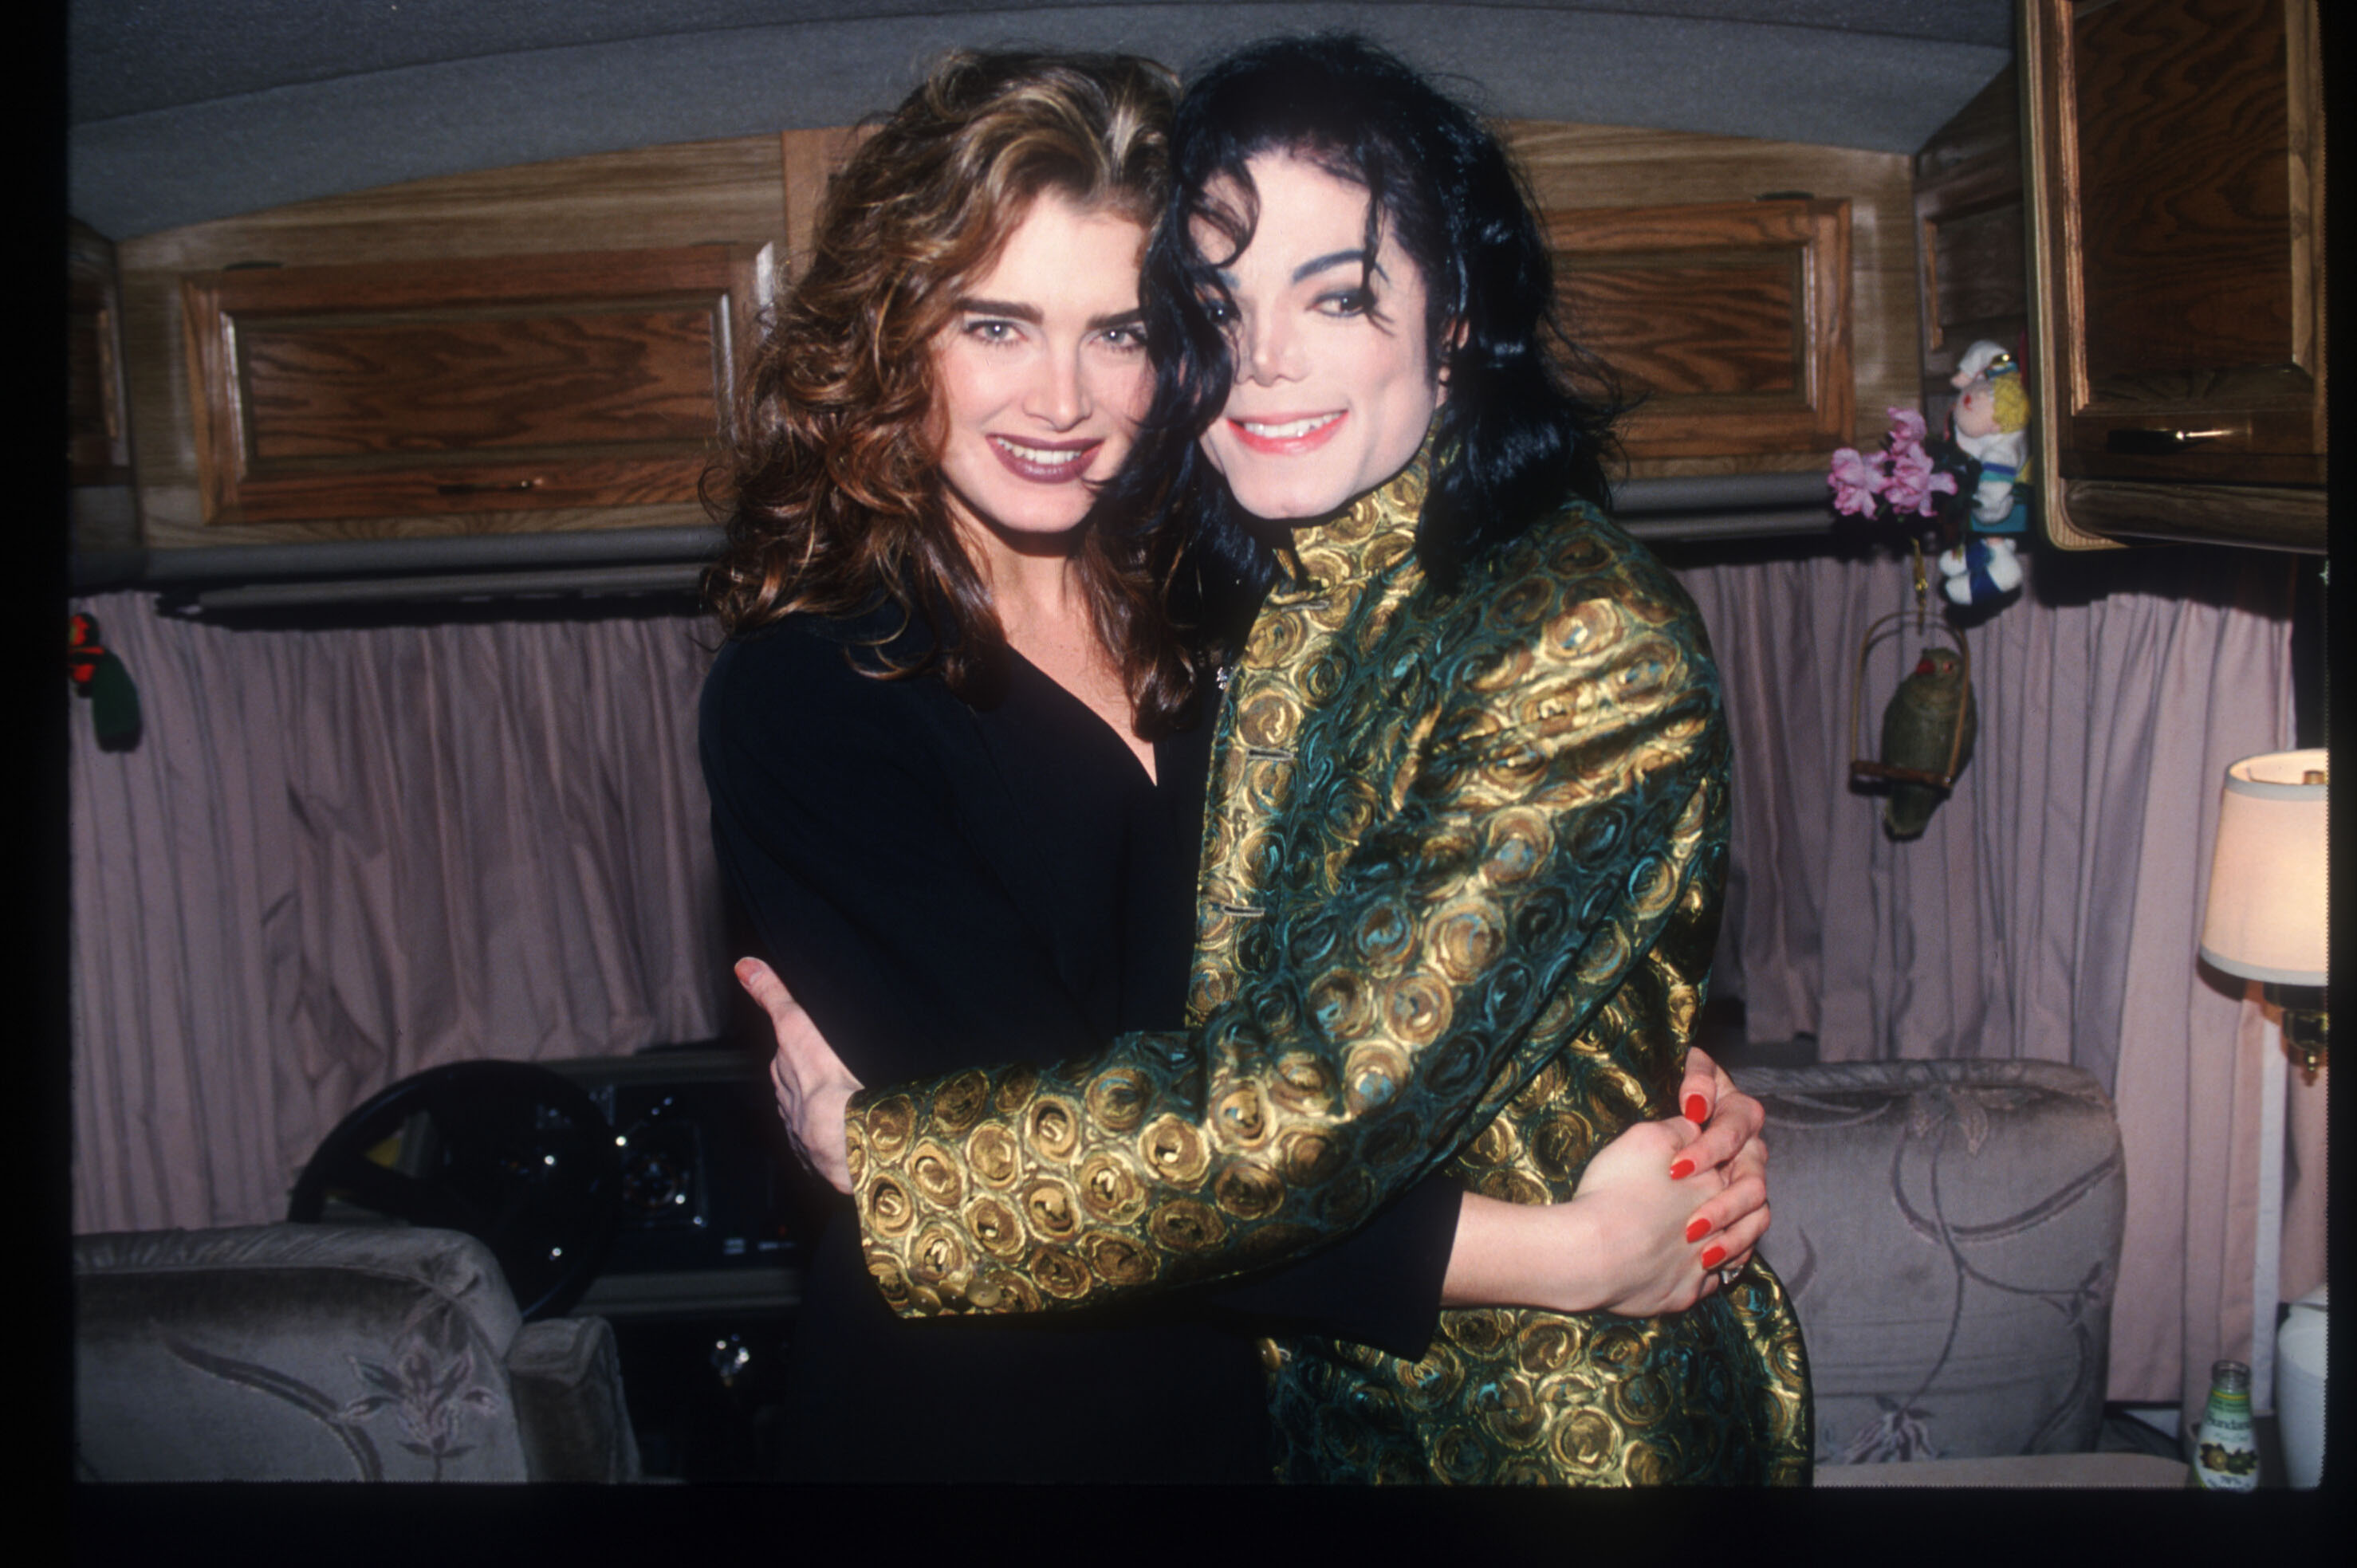 Brooke Shields and Michael Jackson on February 26, 1993, in Los Angeles, California | Source: Getty Images